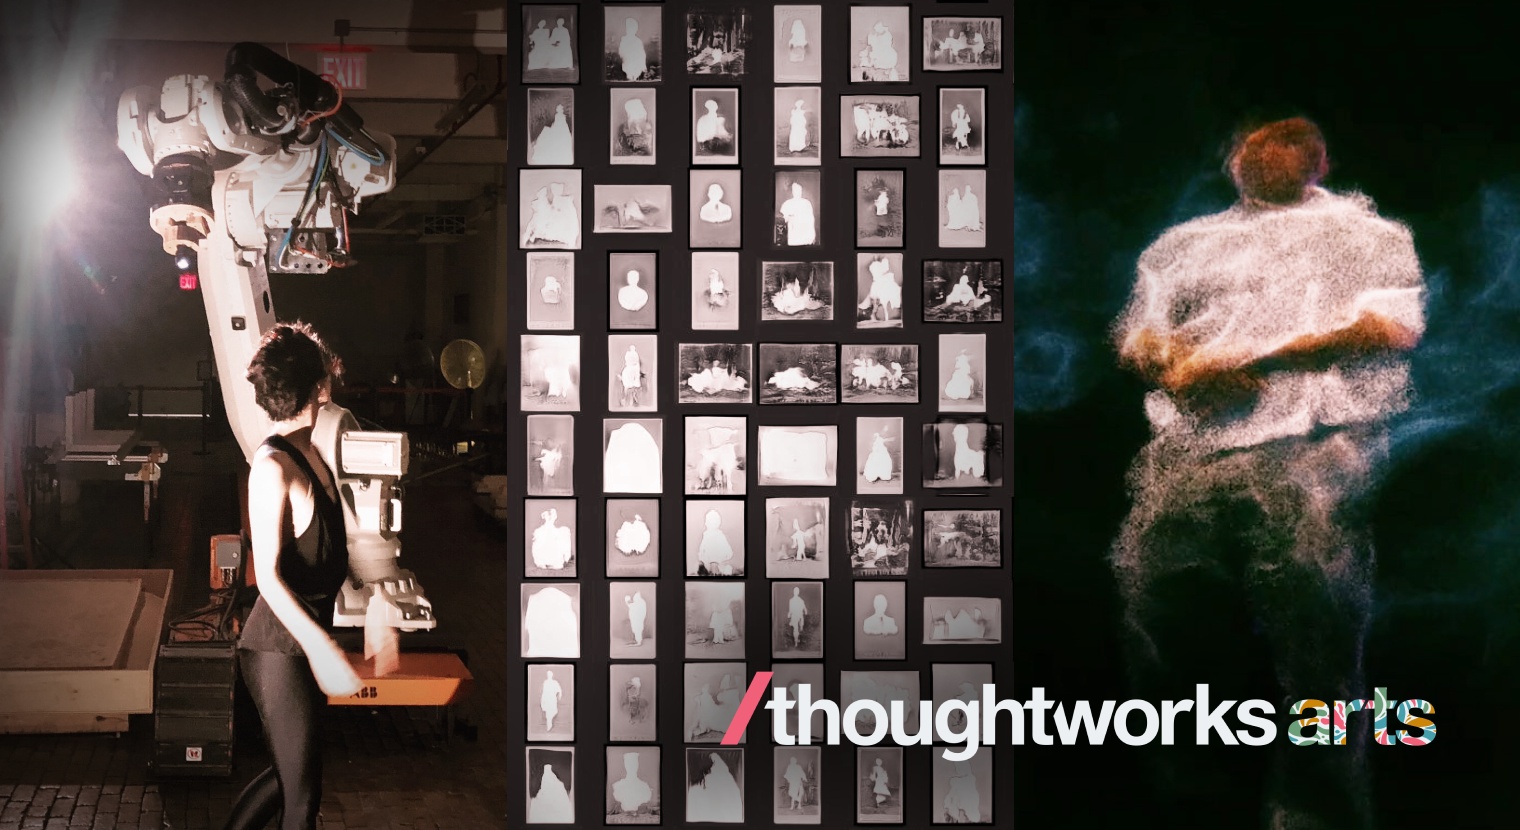 A triple panel image, showing a human dancer with a 16-foot robot (right), a grid of black and white portrait images with the human subjects erased (middle, and a point cloud image (right), stamped with the logo for Thoughtworks Arts.